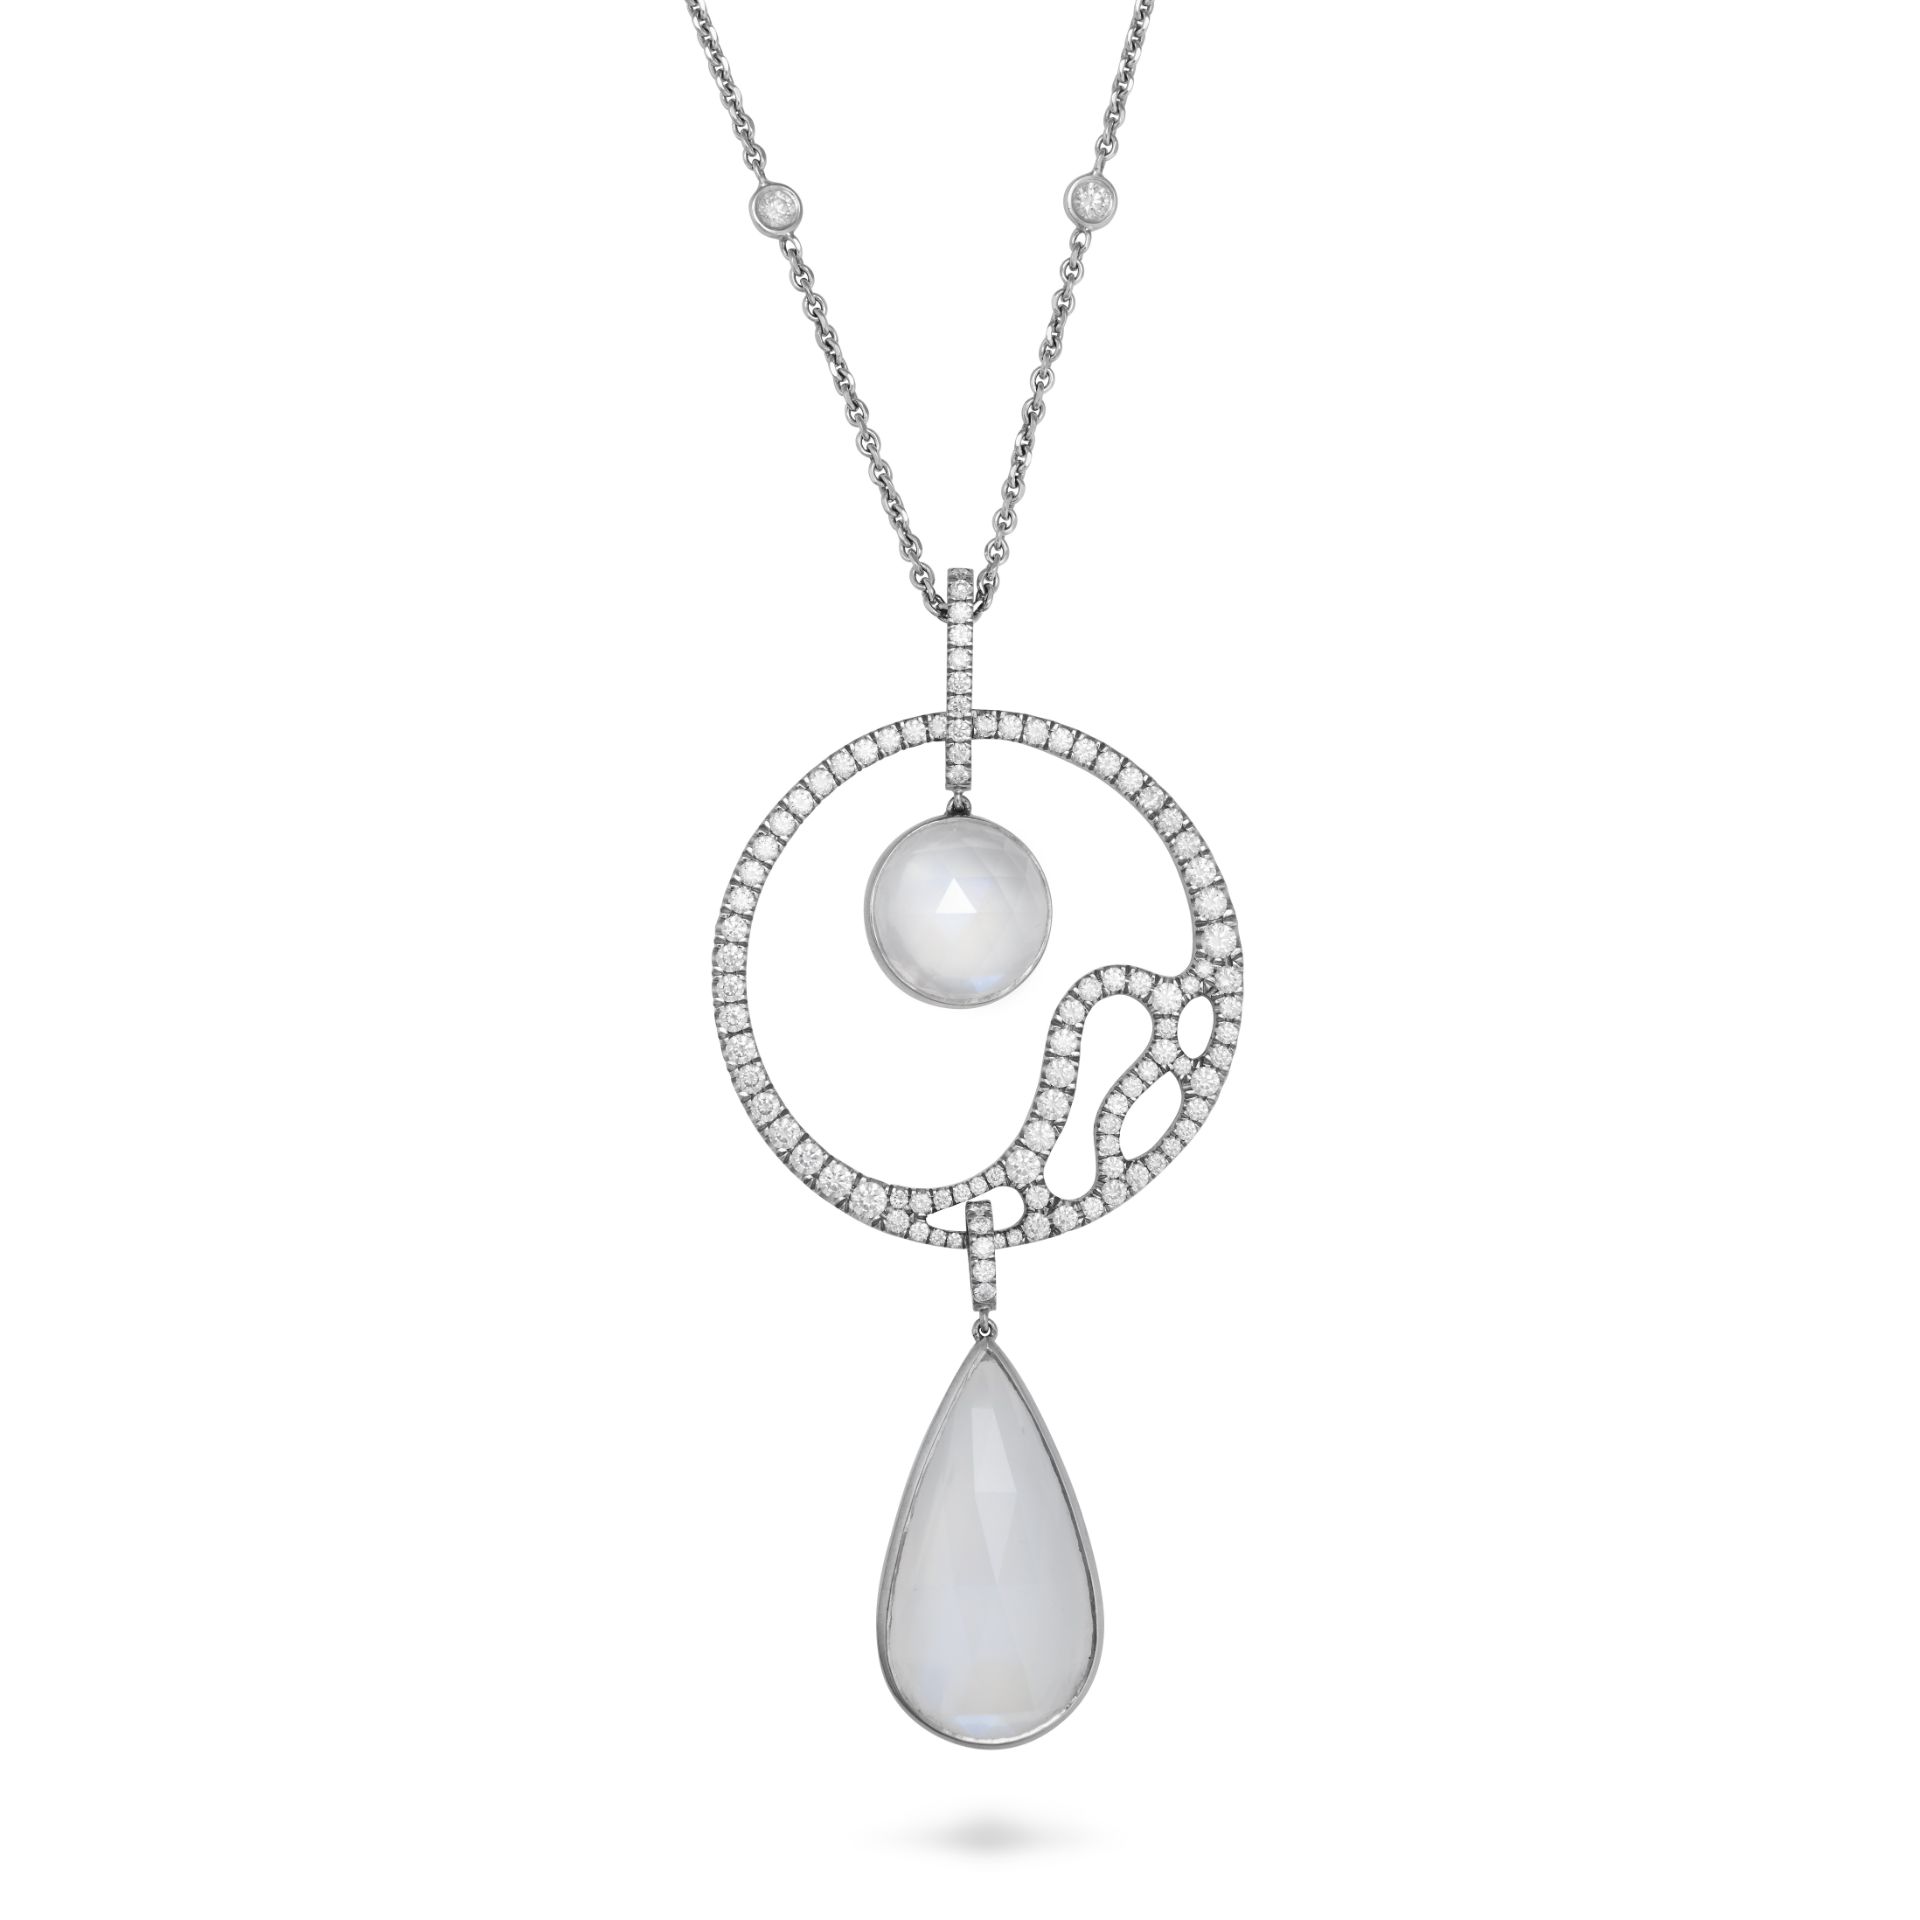 BOODLES, A MOONSTONE AND DIAMOND SEASCAPE PENDANT NECKLACE in white gold, the openwork circular p...